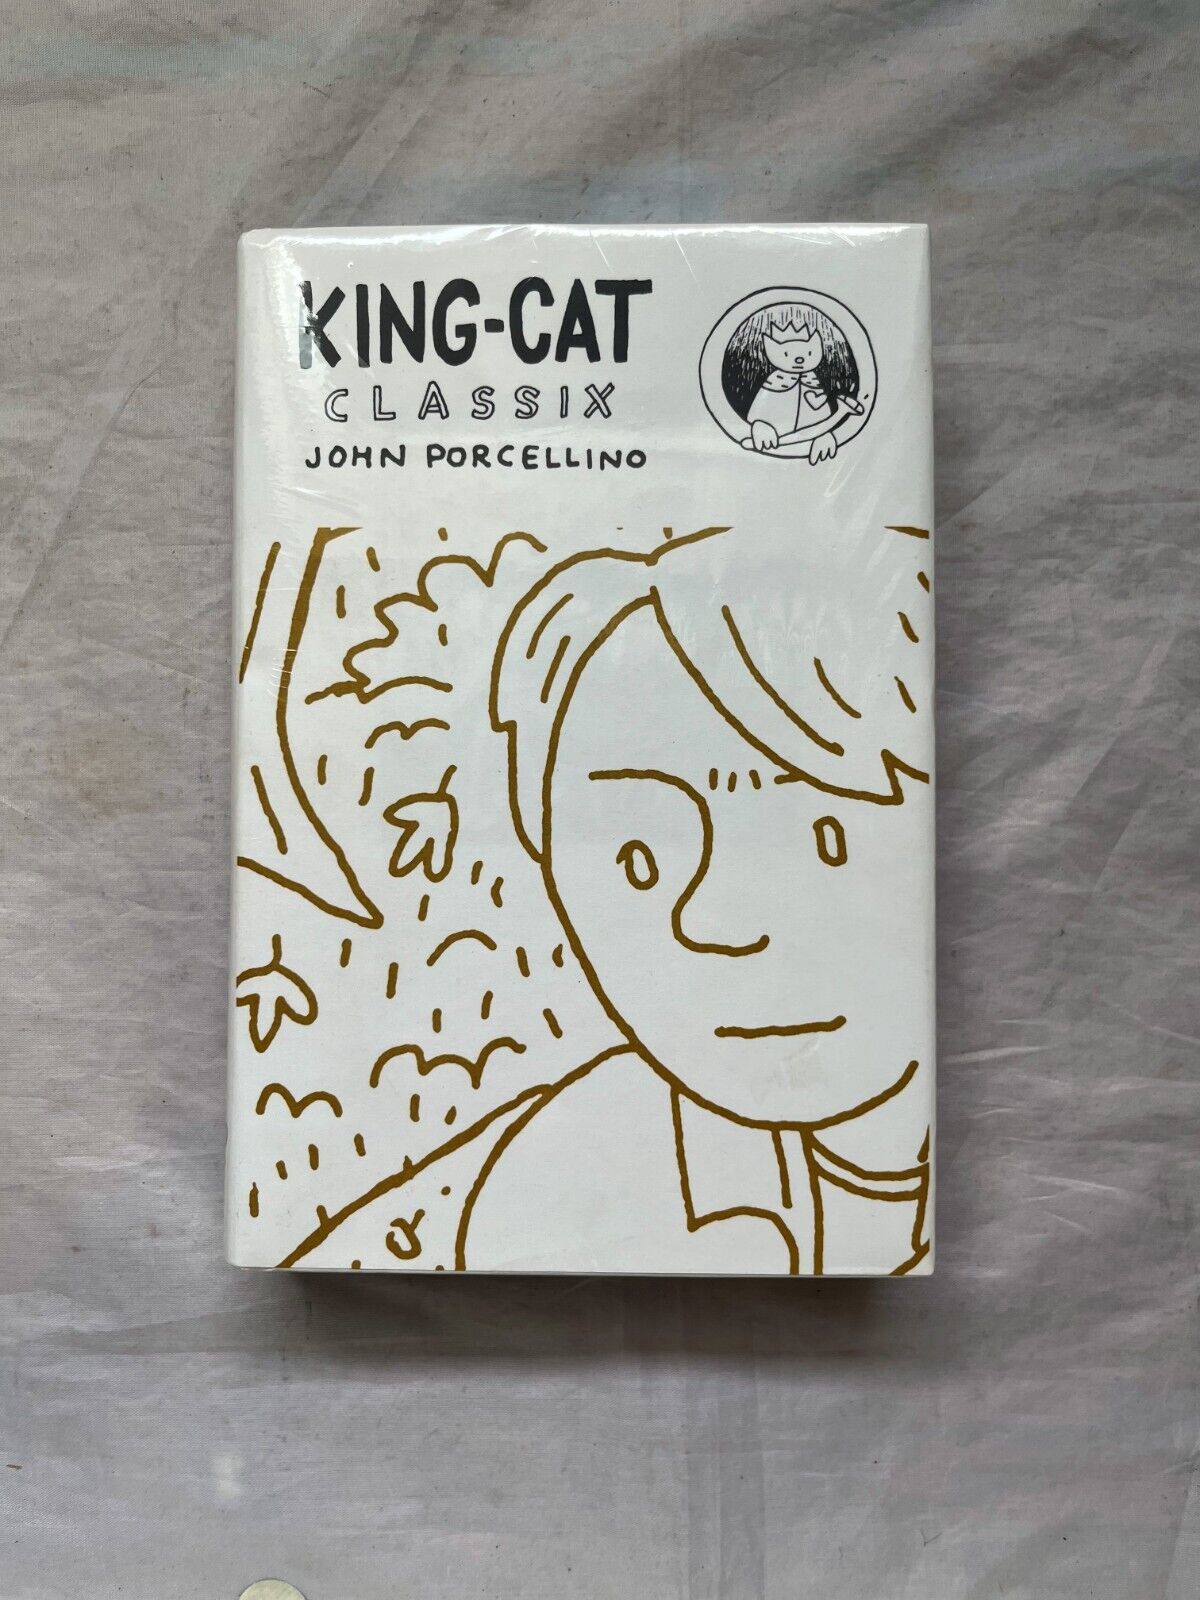 King-Cat Classix by John Porcellino | The Best of King-Cat Comics Hardcover